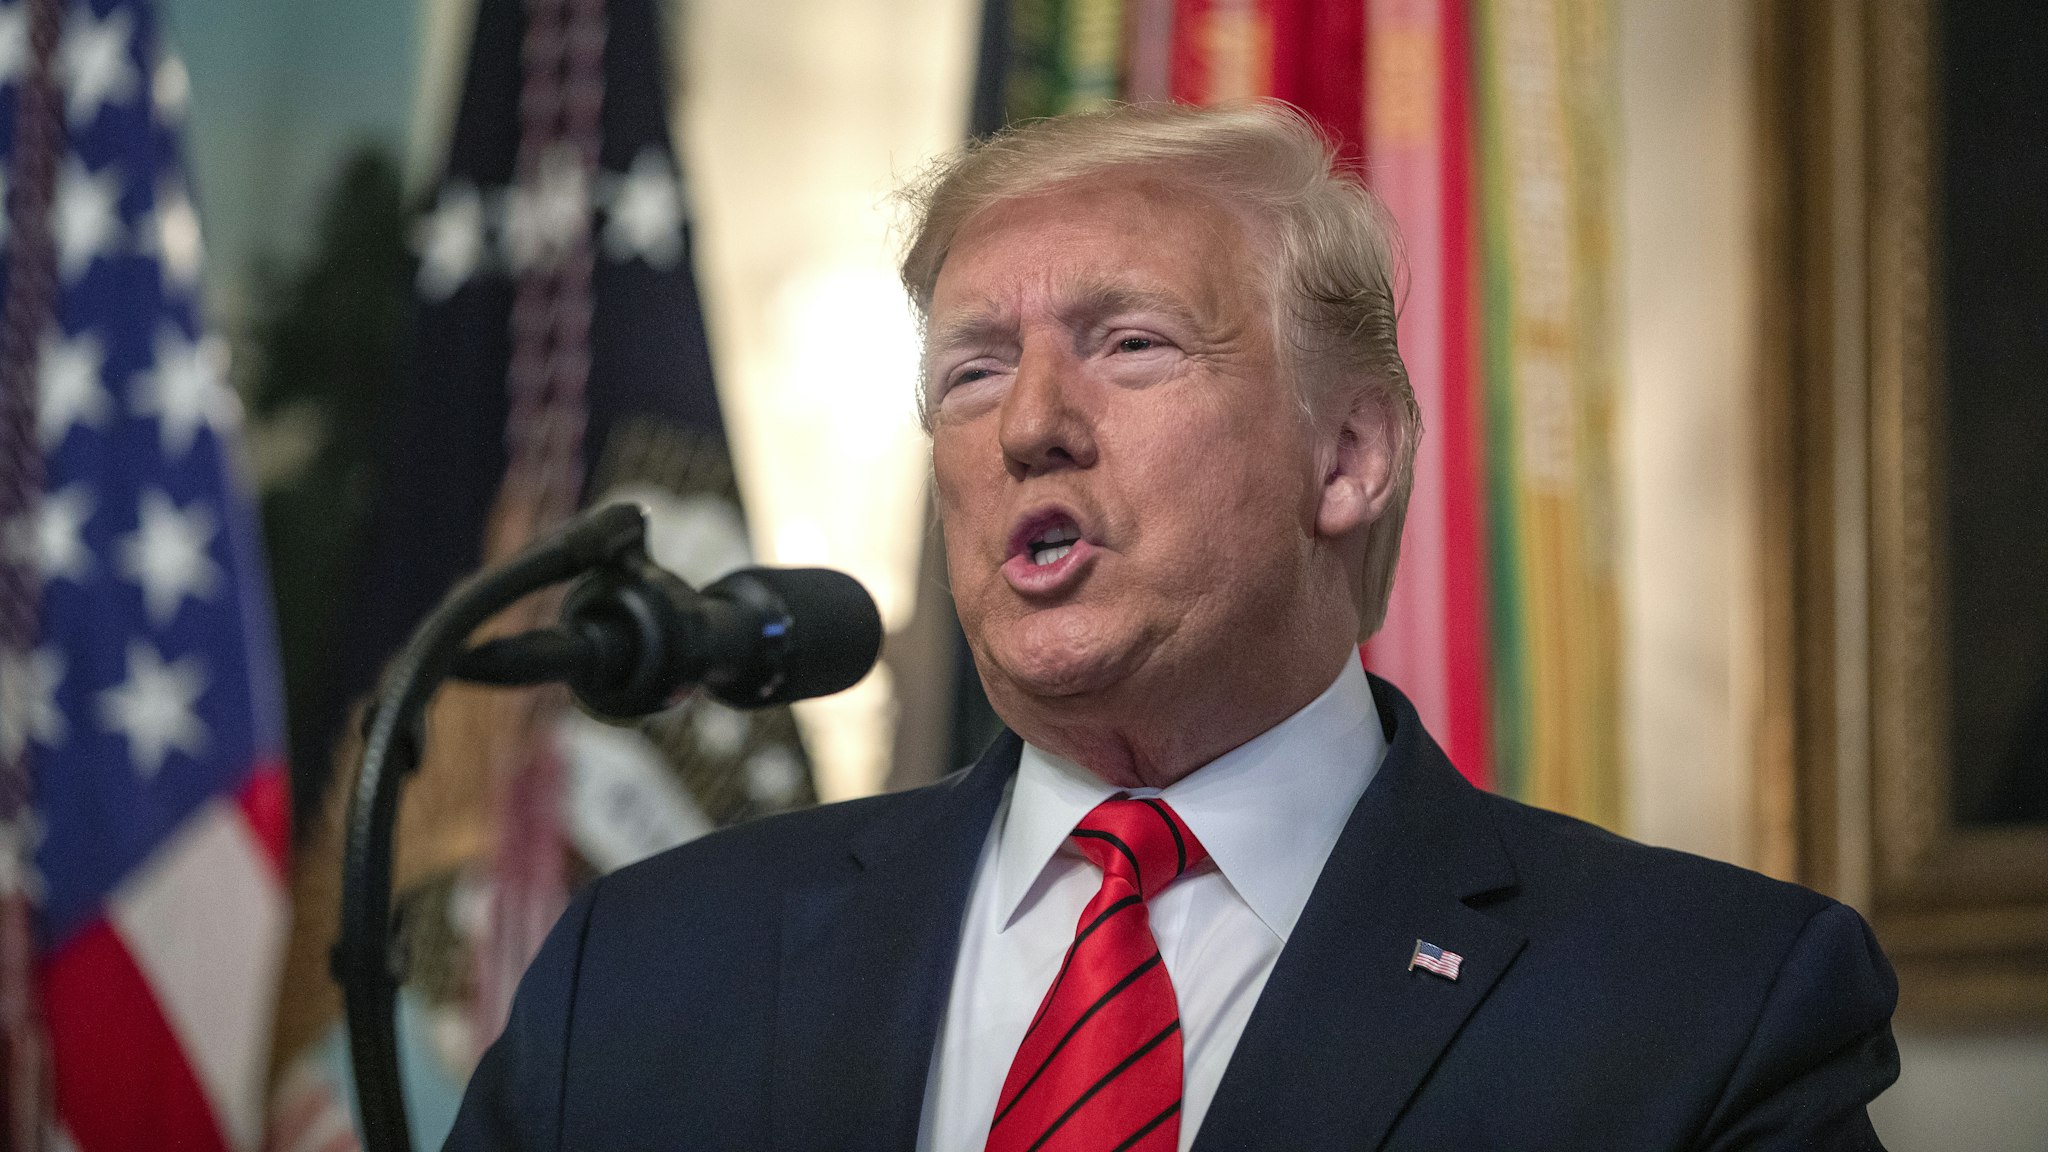 U.S. President Donald Trump makes a statement in the Diplomatic Reception Room of the White House October 27, 2019 in Washington, DC. President Trump announced that ISIS leader Abu Bakr al-Baghdadi has been killed in a military operation in northwest Syria.